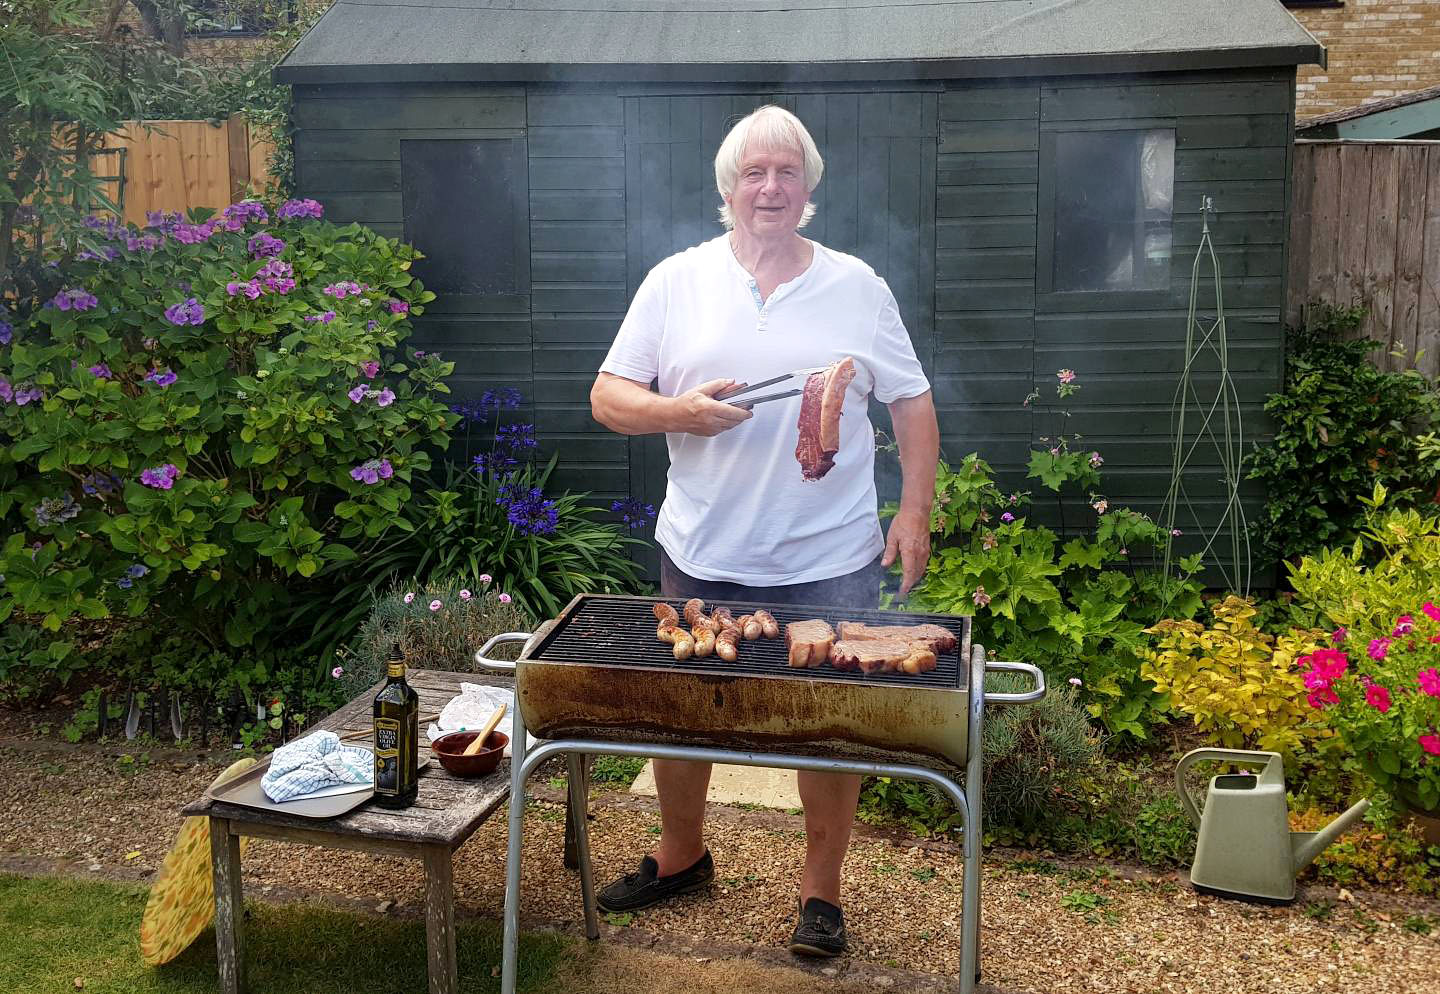 The winner of the 2020 OSM Province of Surrey Masterchef Barbecue award goes to Wy.Bro. Jack Love